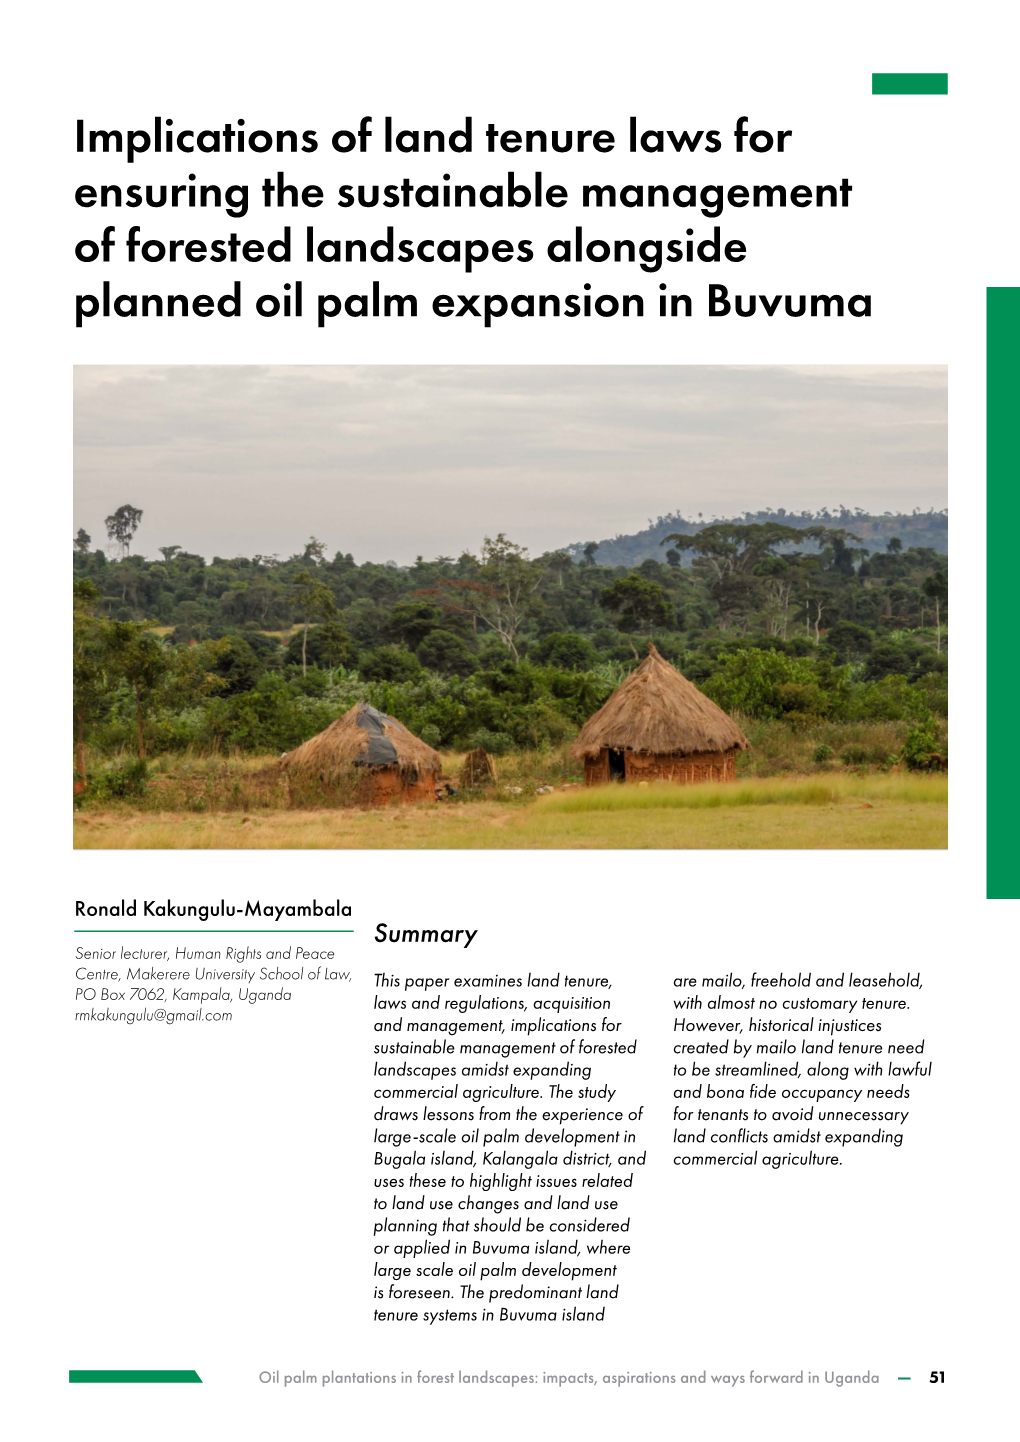 Implications of Land Tenure Laws for Ensuring the Sustainable Management of Forested Landscapes Alongside Planned Oil Palm Expansion in Buvuma